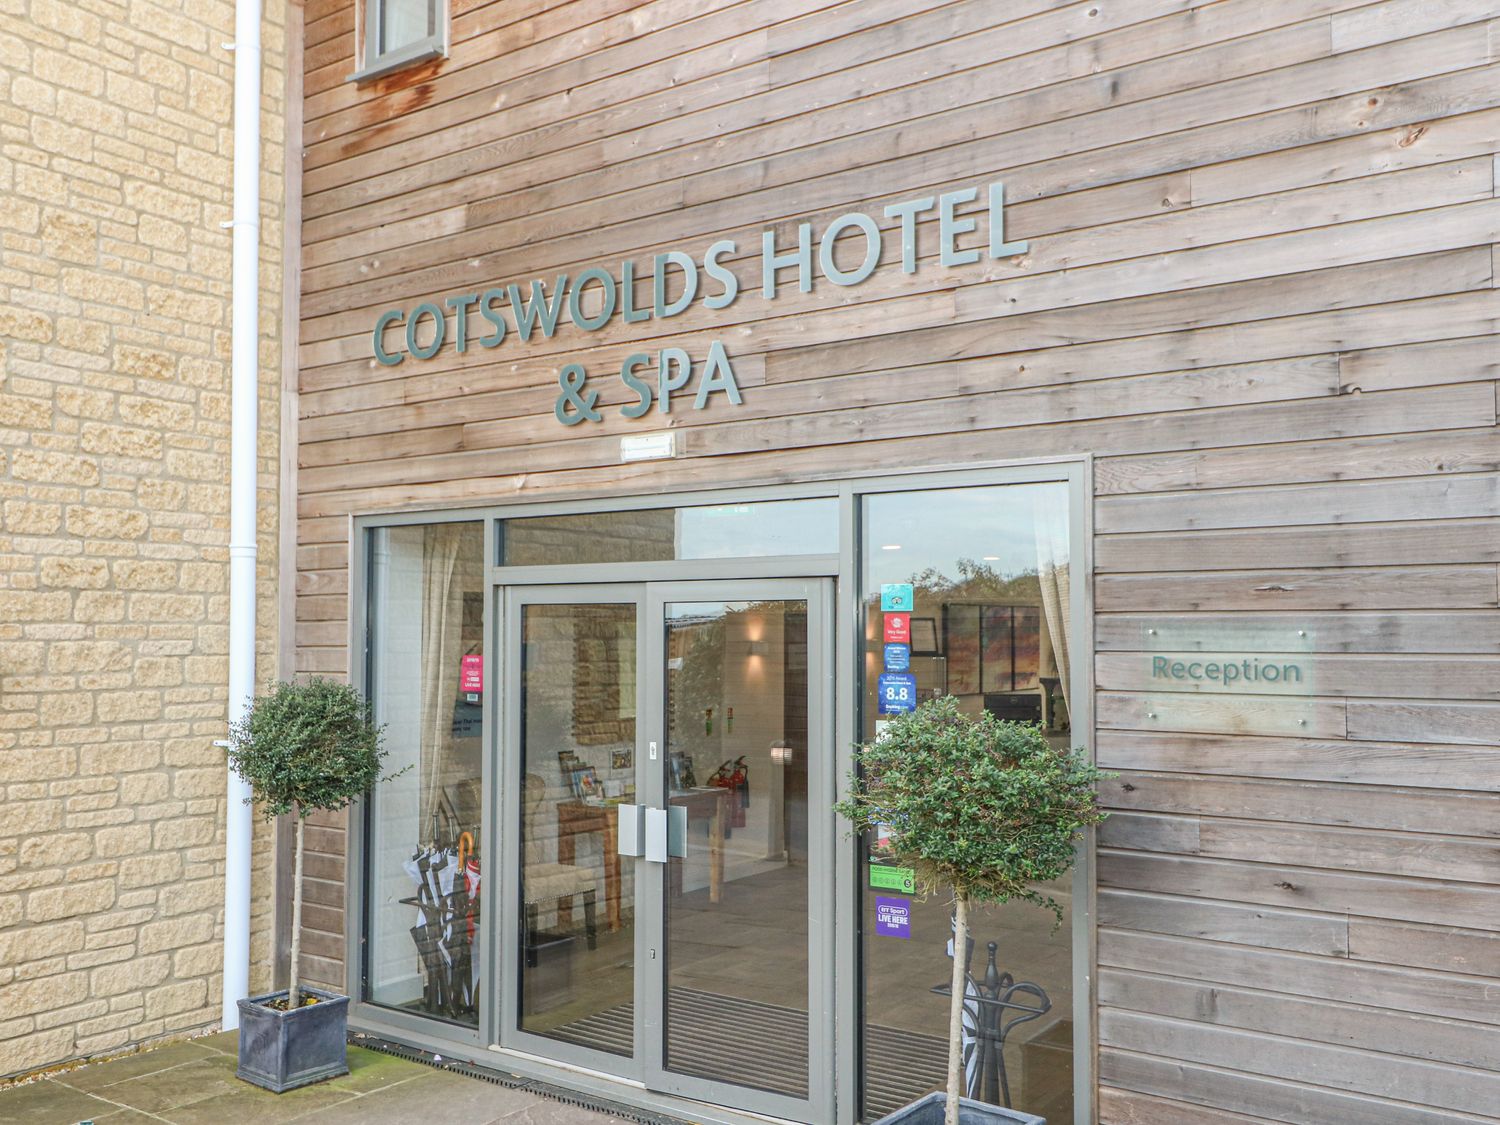 Cotswold Club Apartment (2 Bedroom Sleeps 4) - Cotswolds - 1040156 - photo 1